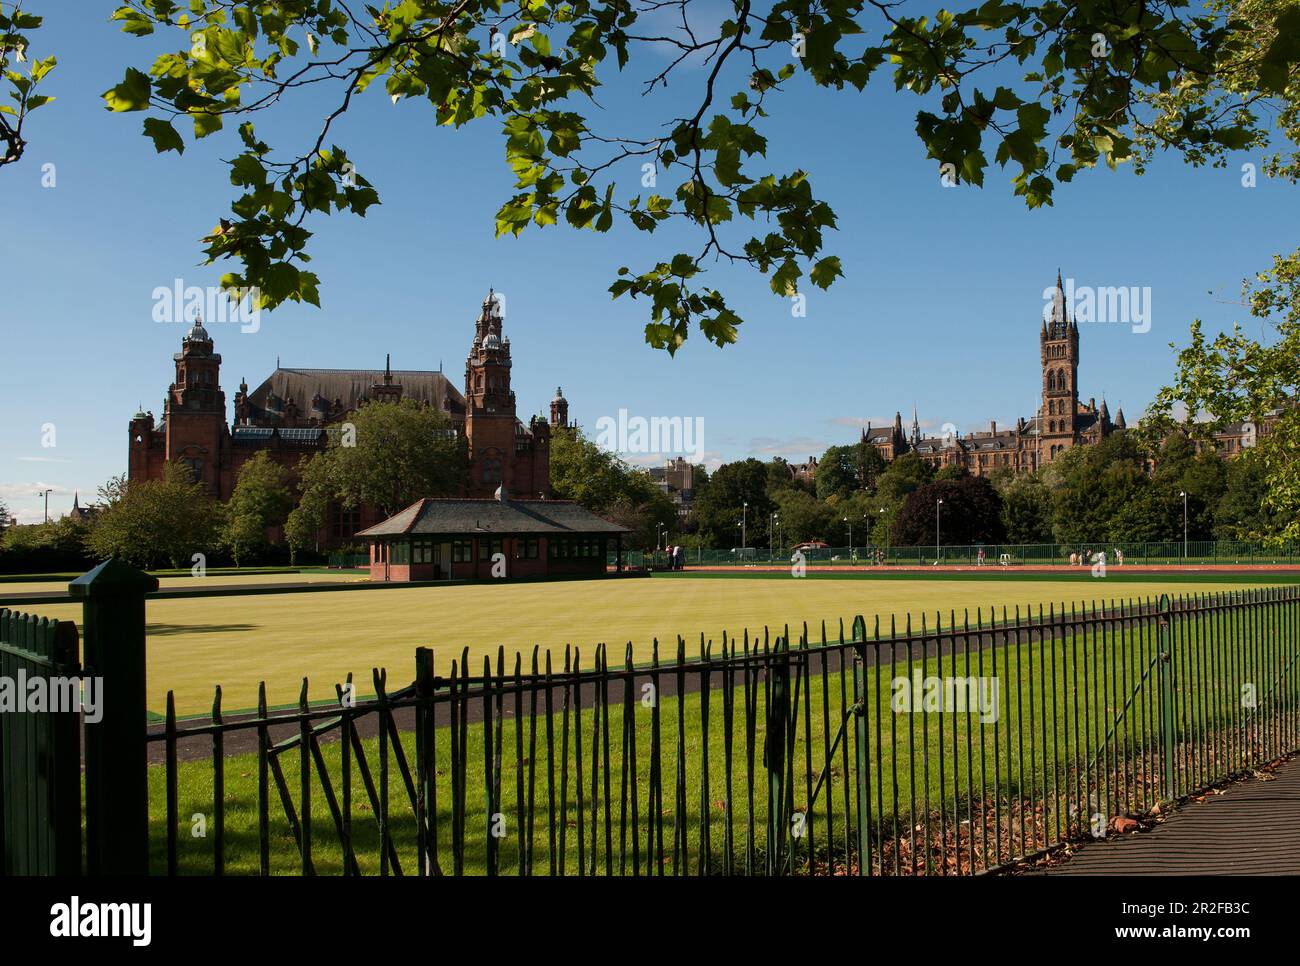 The pavilion of Kelvingrove lawn bowling green in front of Kelvingrove Art Gallery and Museum and the University of Glasgow in Glasgow, Scotland, UK Stock Photo